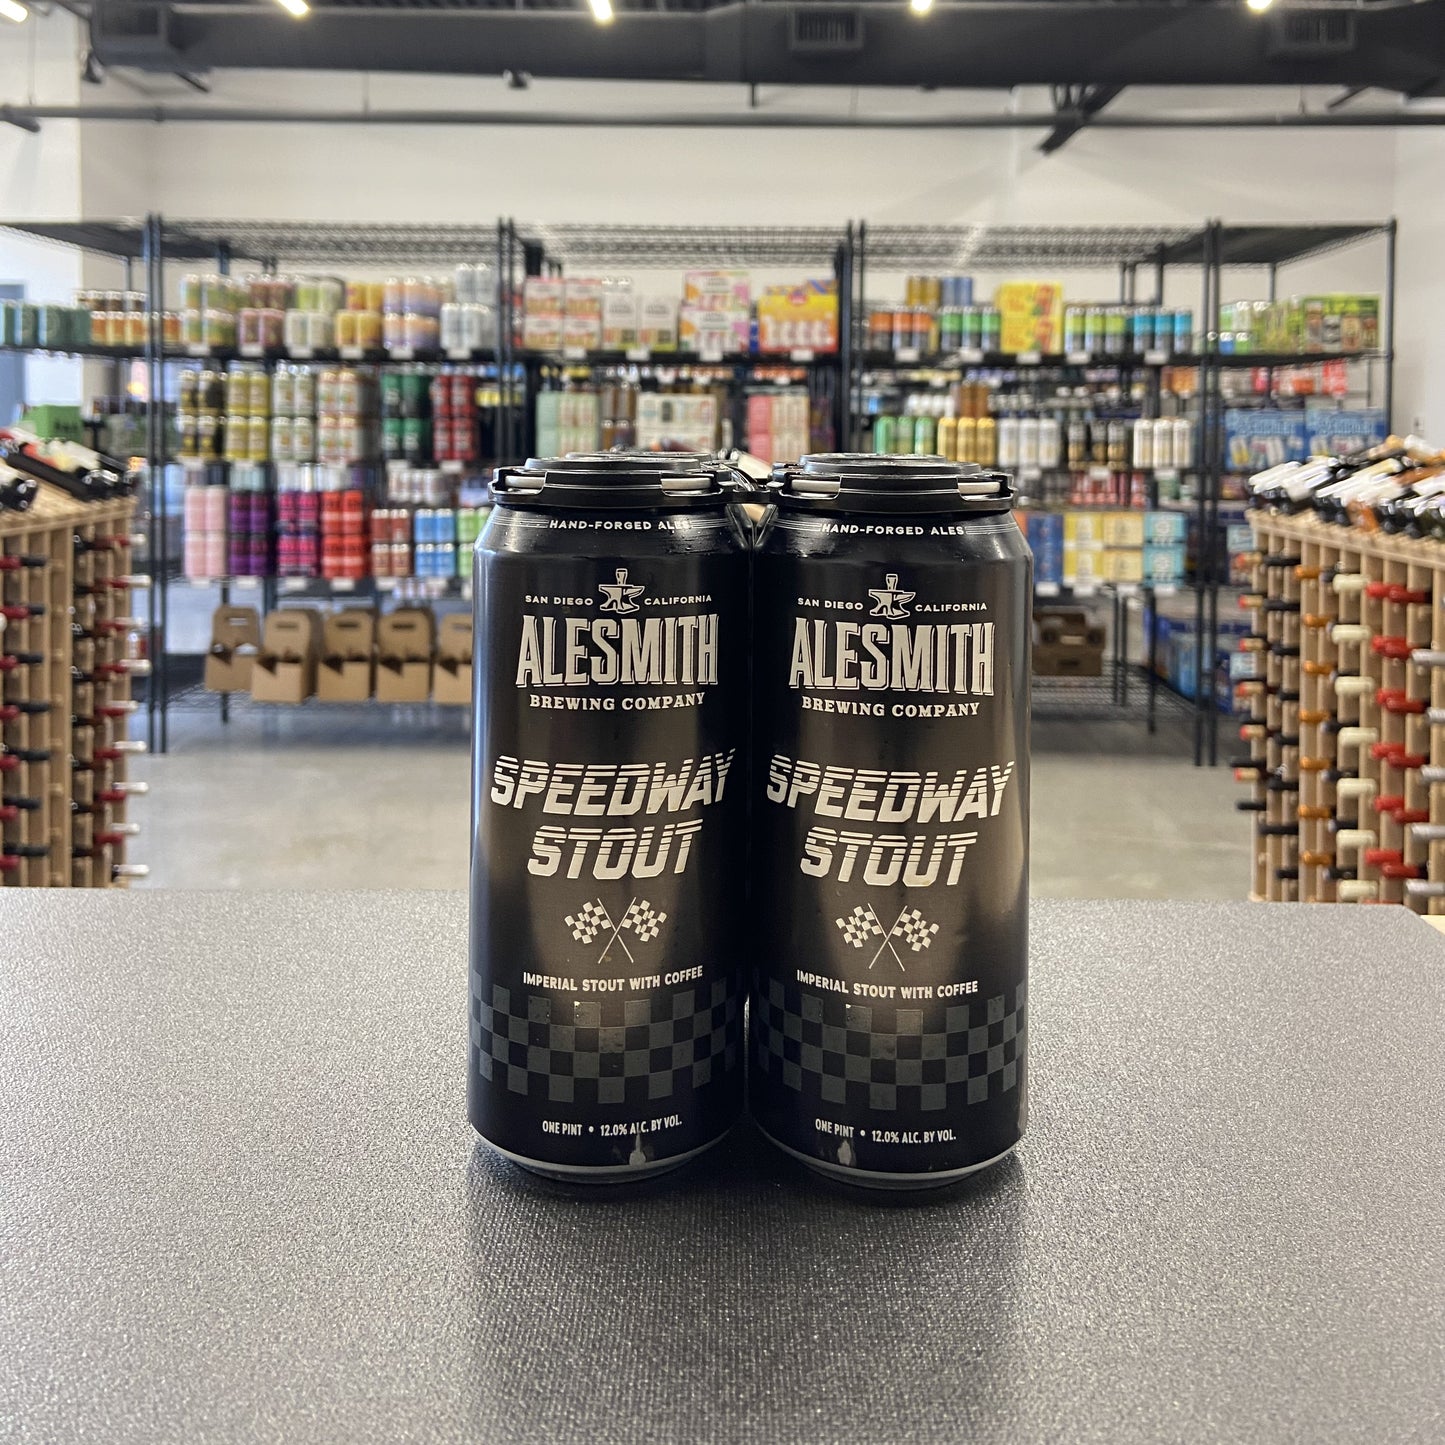 Alesmith Brewing Co. Speedway Stout